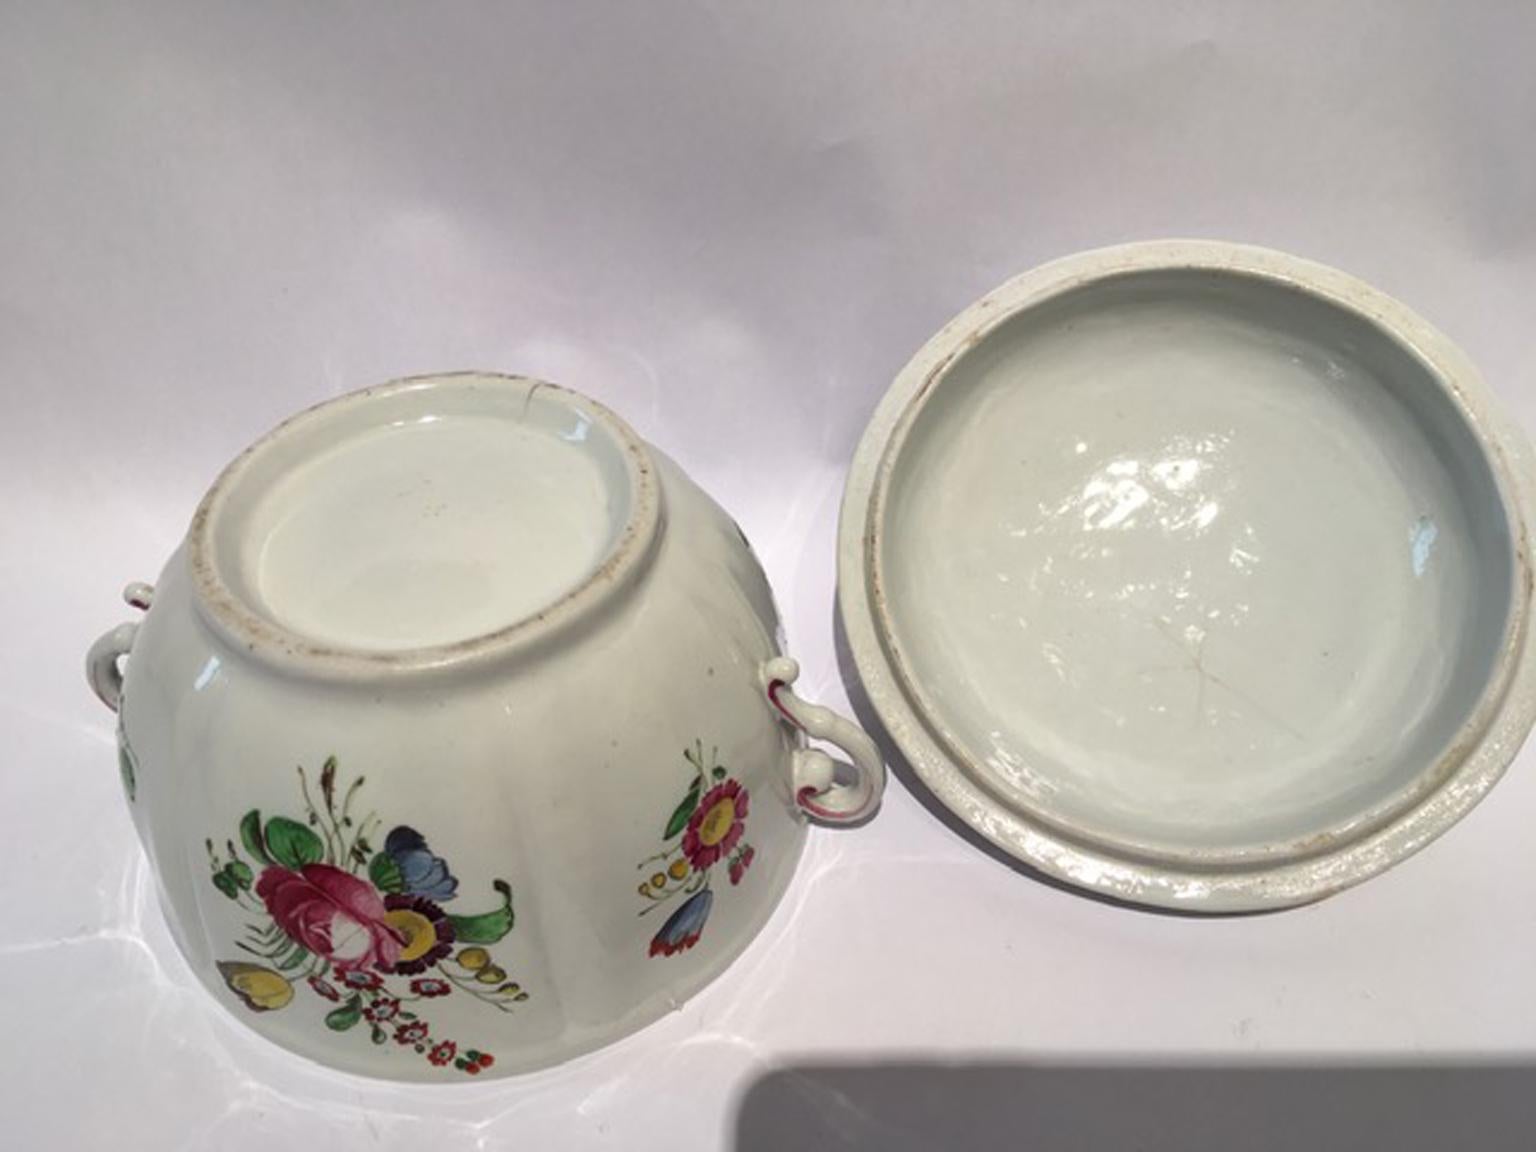 Italy 18th Century Richard Ginori Porcelain Covered Cup or Sugar Bowl For Sale 1